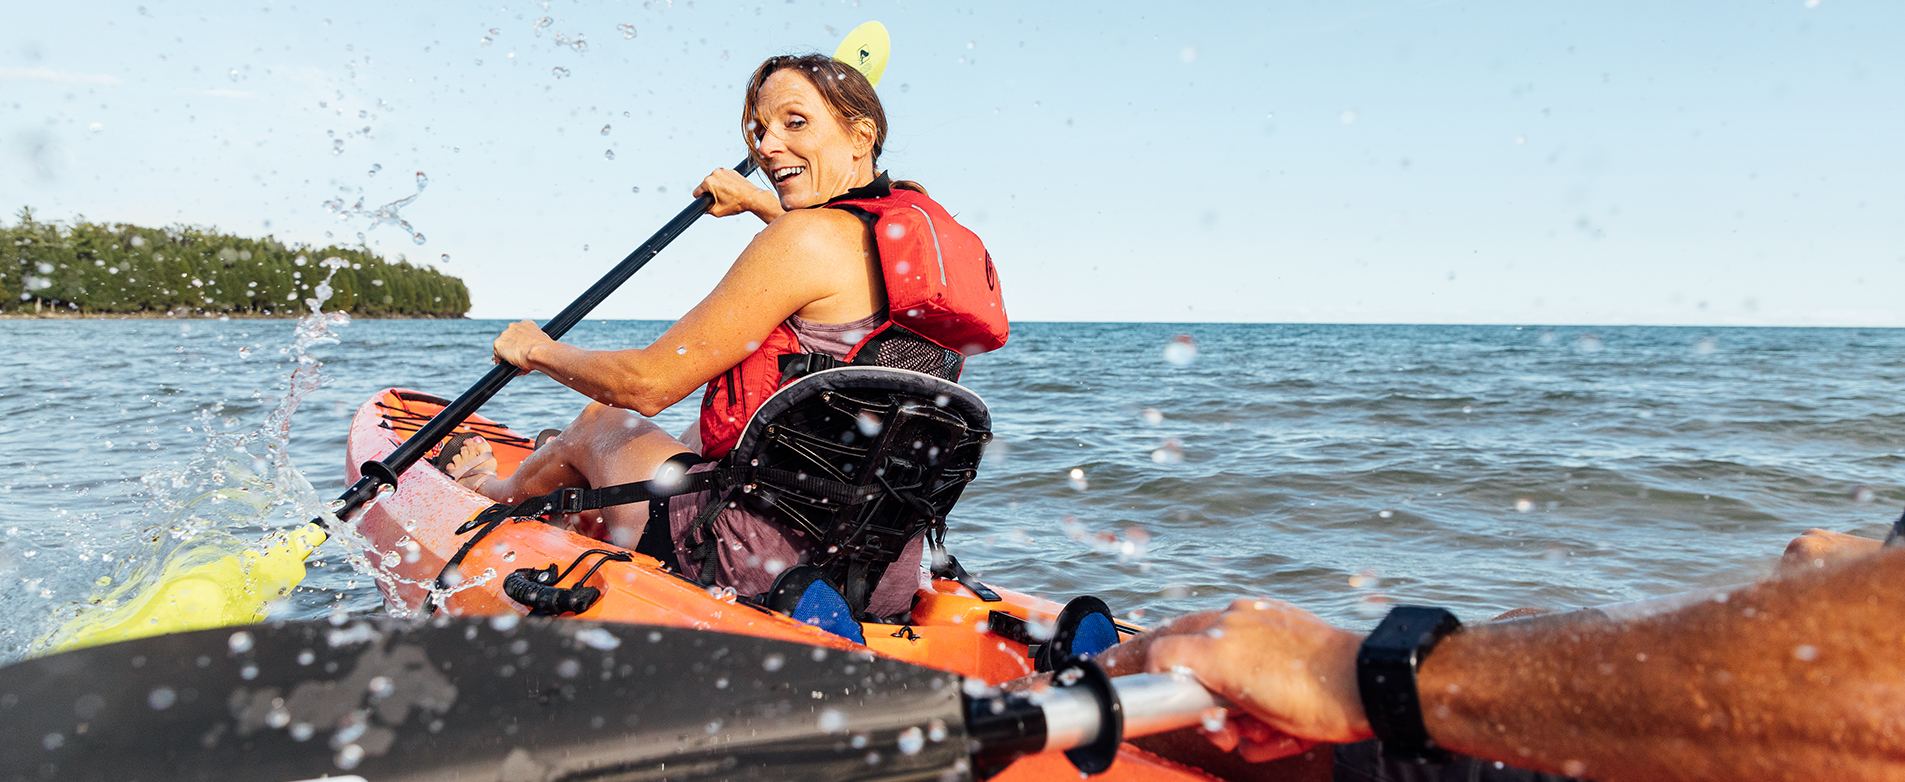 The Best Water Sports Activities To Enjoy During Your Vacations